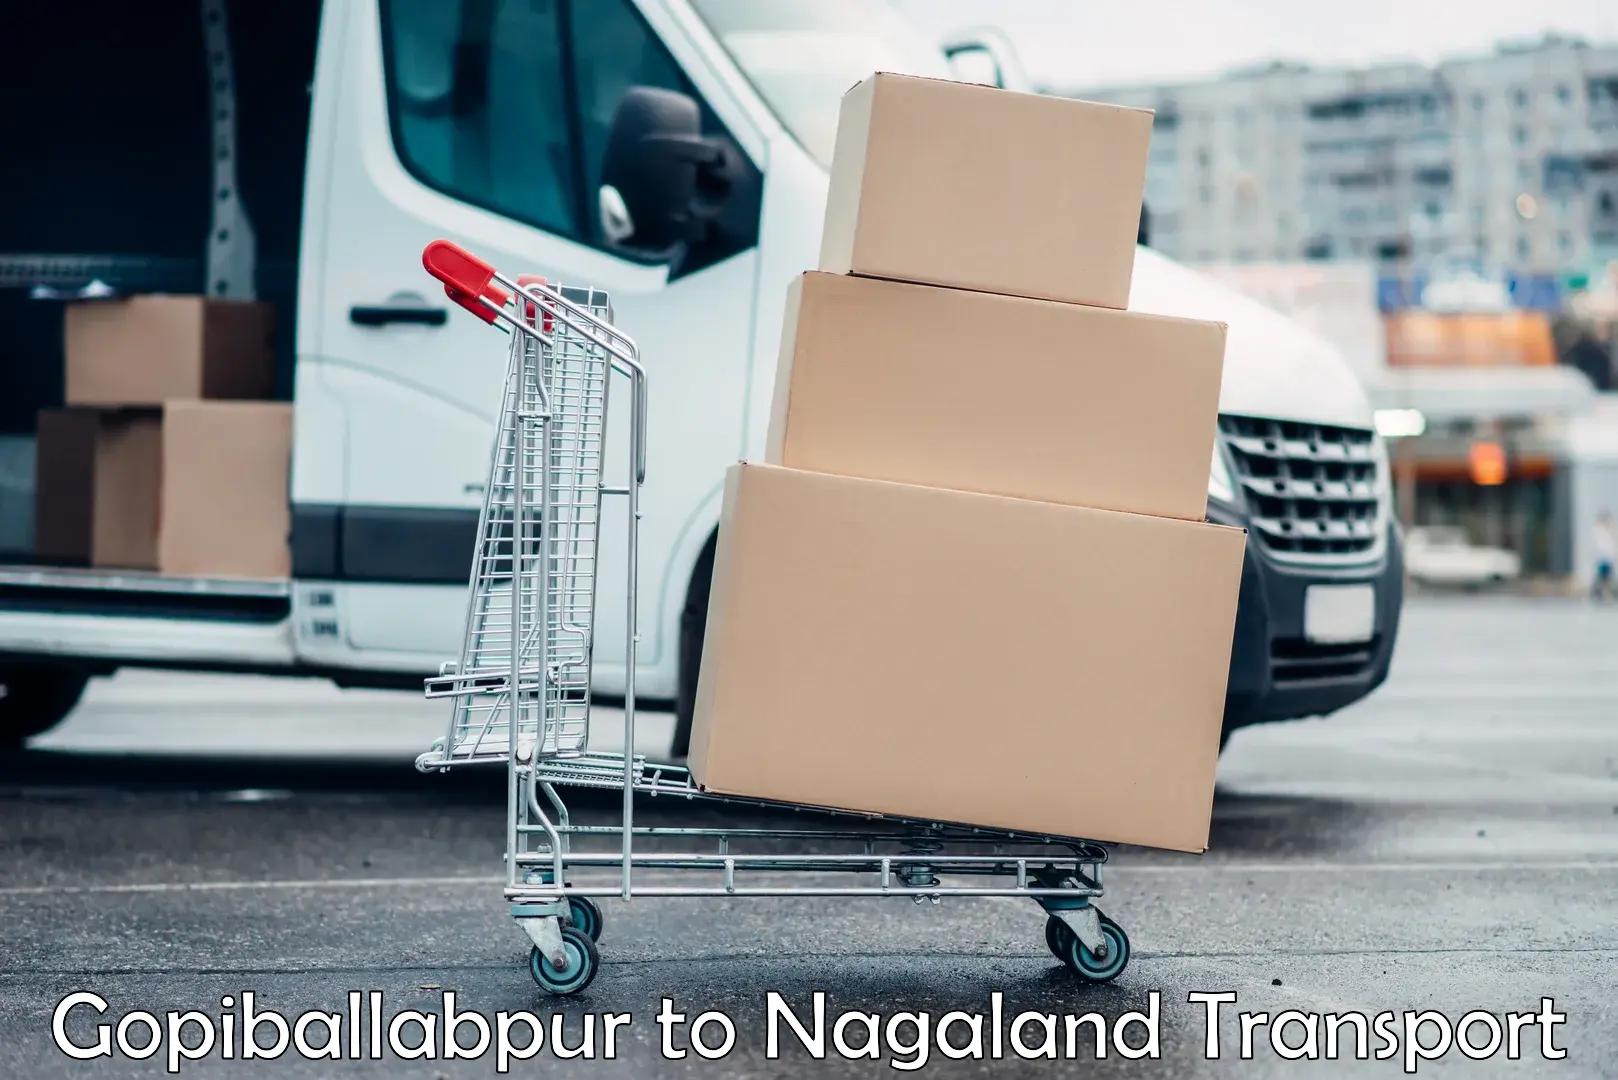 Goods delivery service Gopiballabpur to Nagaland